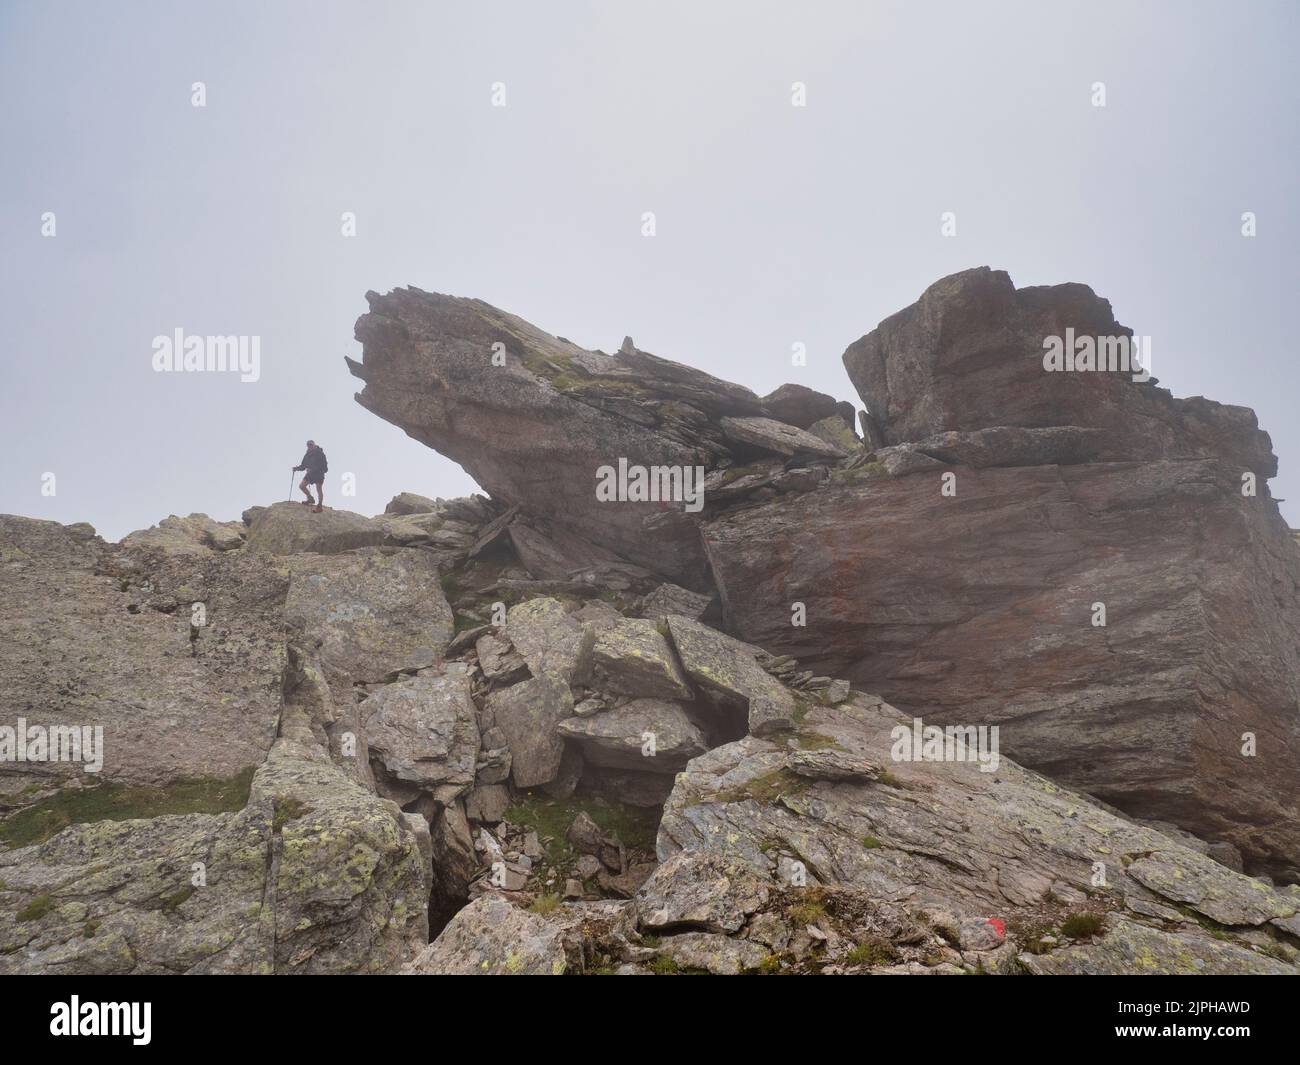 These are rock formations on the Grindberg Spitze climb near the Gams Hut, is a German Alpine Club mountain refuge managed by DAV Sektion Otterfing. Stock Photo